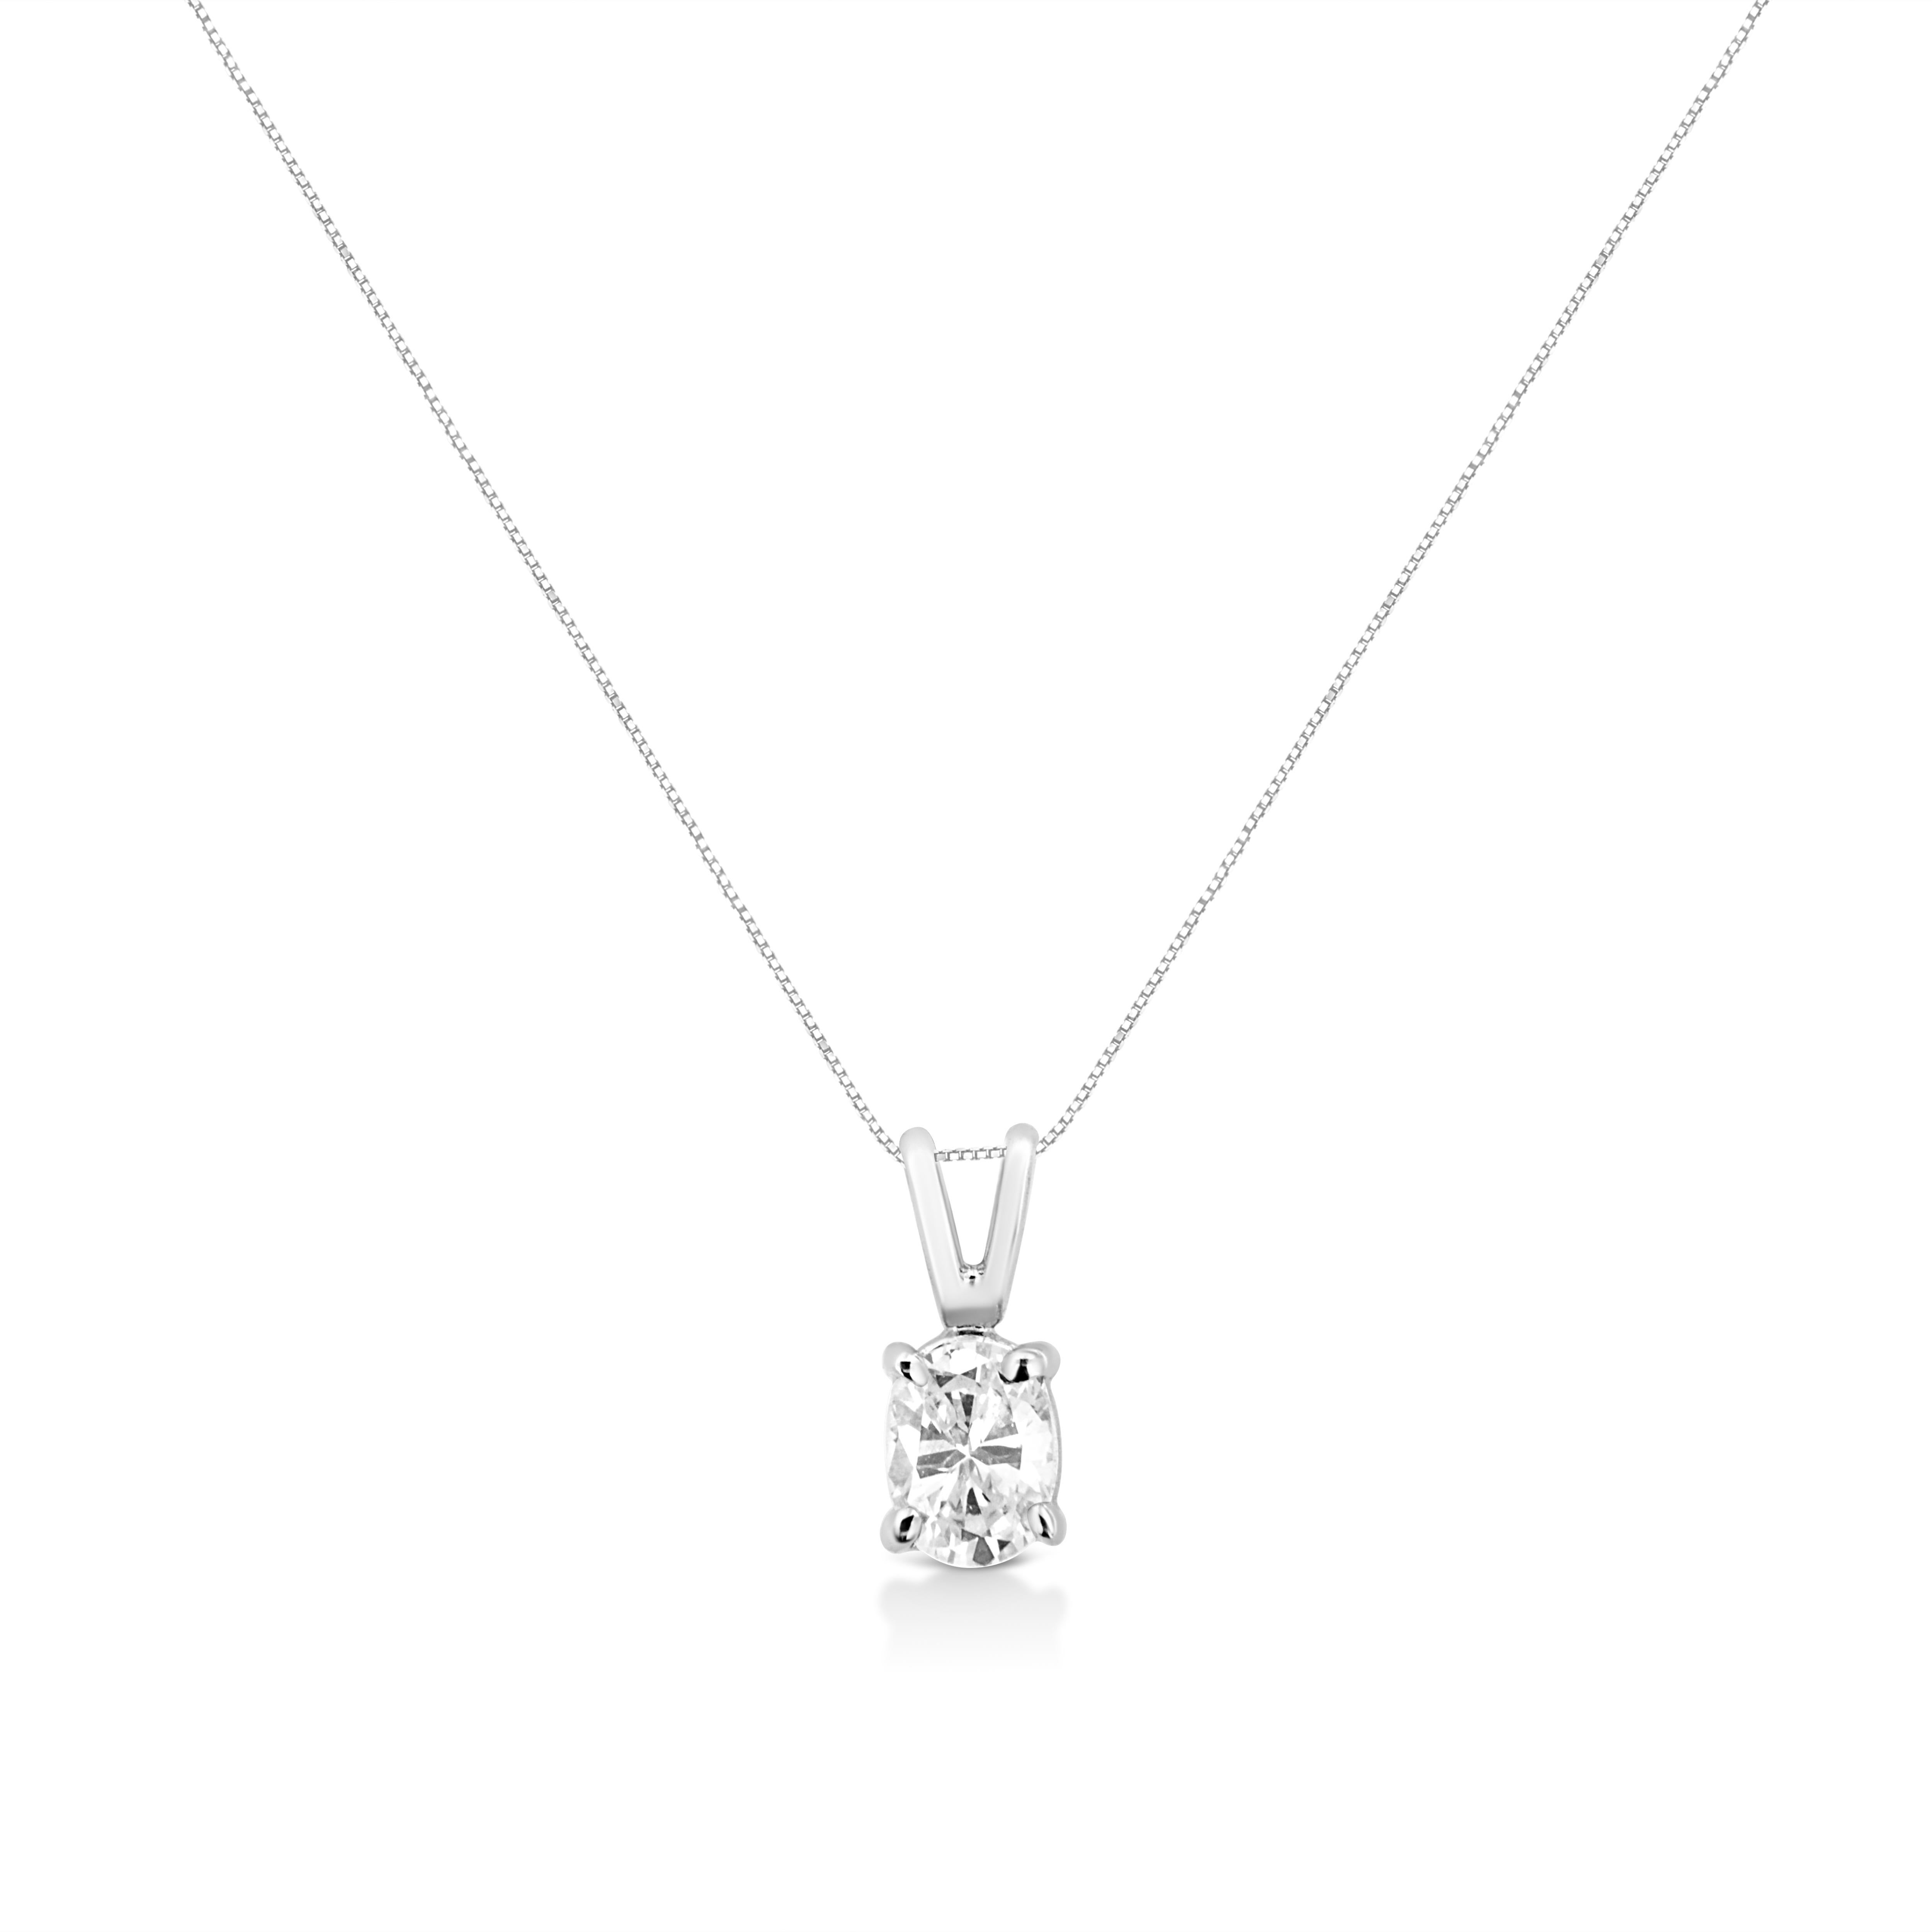 Add a little sparkle to your day with this delicate emerald diamond solitaire pendant. A dazzling 1/3ct TDW solitaire oval cut diamond dangles from a box chain that secures with a spring ring clasp. This natural diamond is masterfully set in an